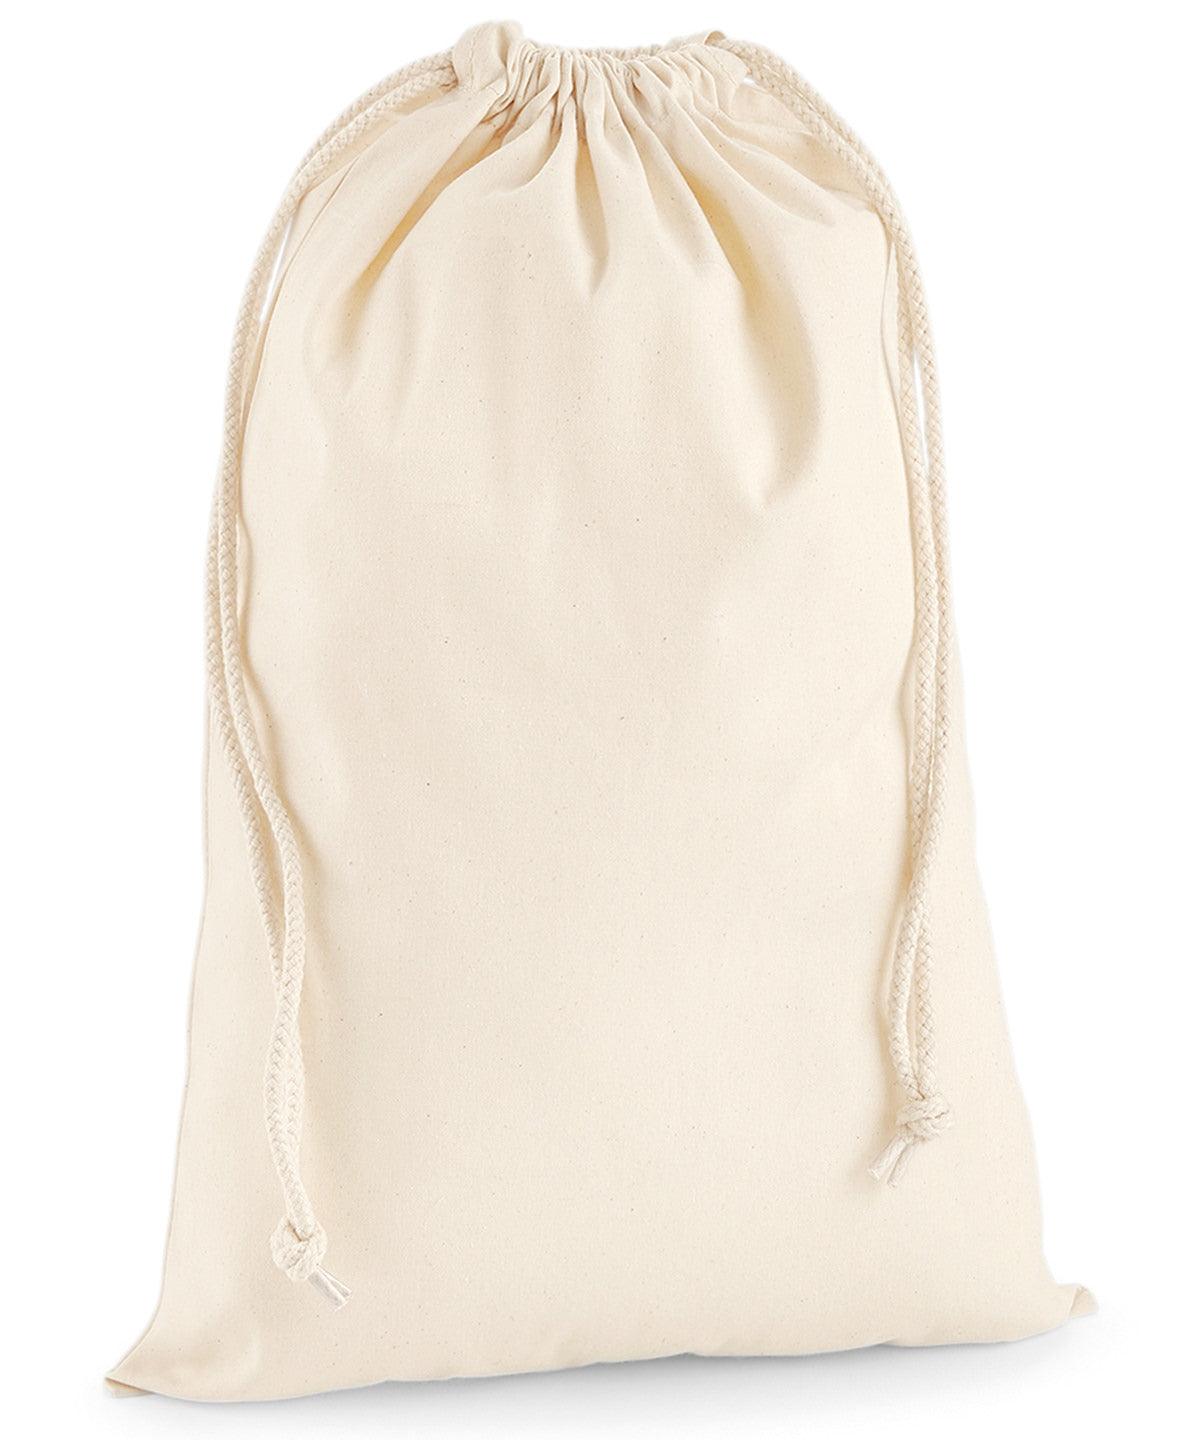 Natural - Premium cotton stuff bag Bags Westford Mill Bags & Luggage, Must Haves Schoolwear Centres